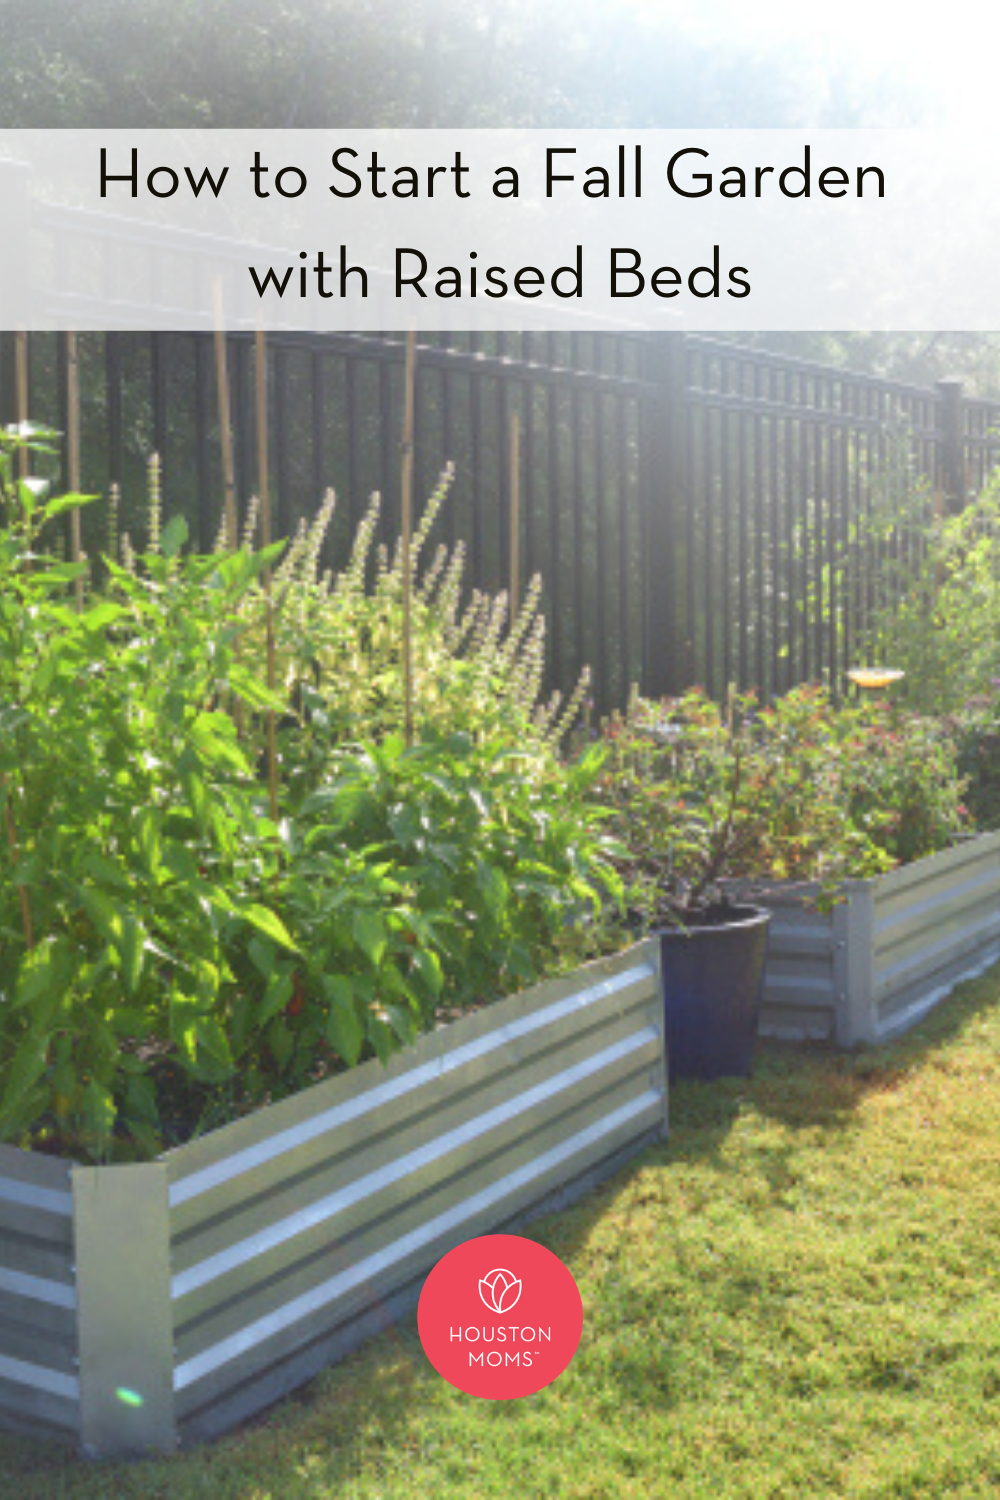 Houston Moms "How to Start a Fall Garden with Raised Beds" #houstonmoms #houstonmomsblog #momsaroundhouston